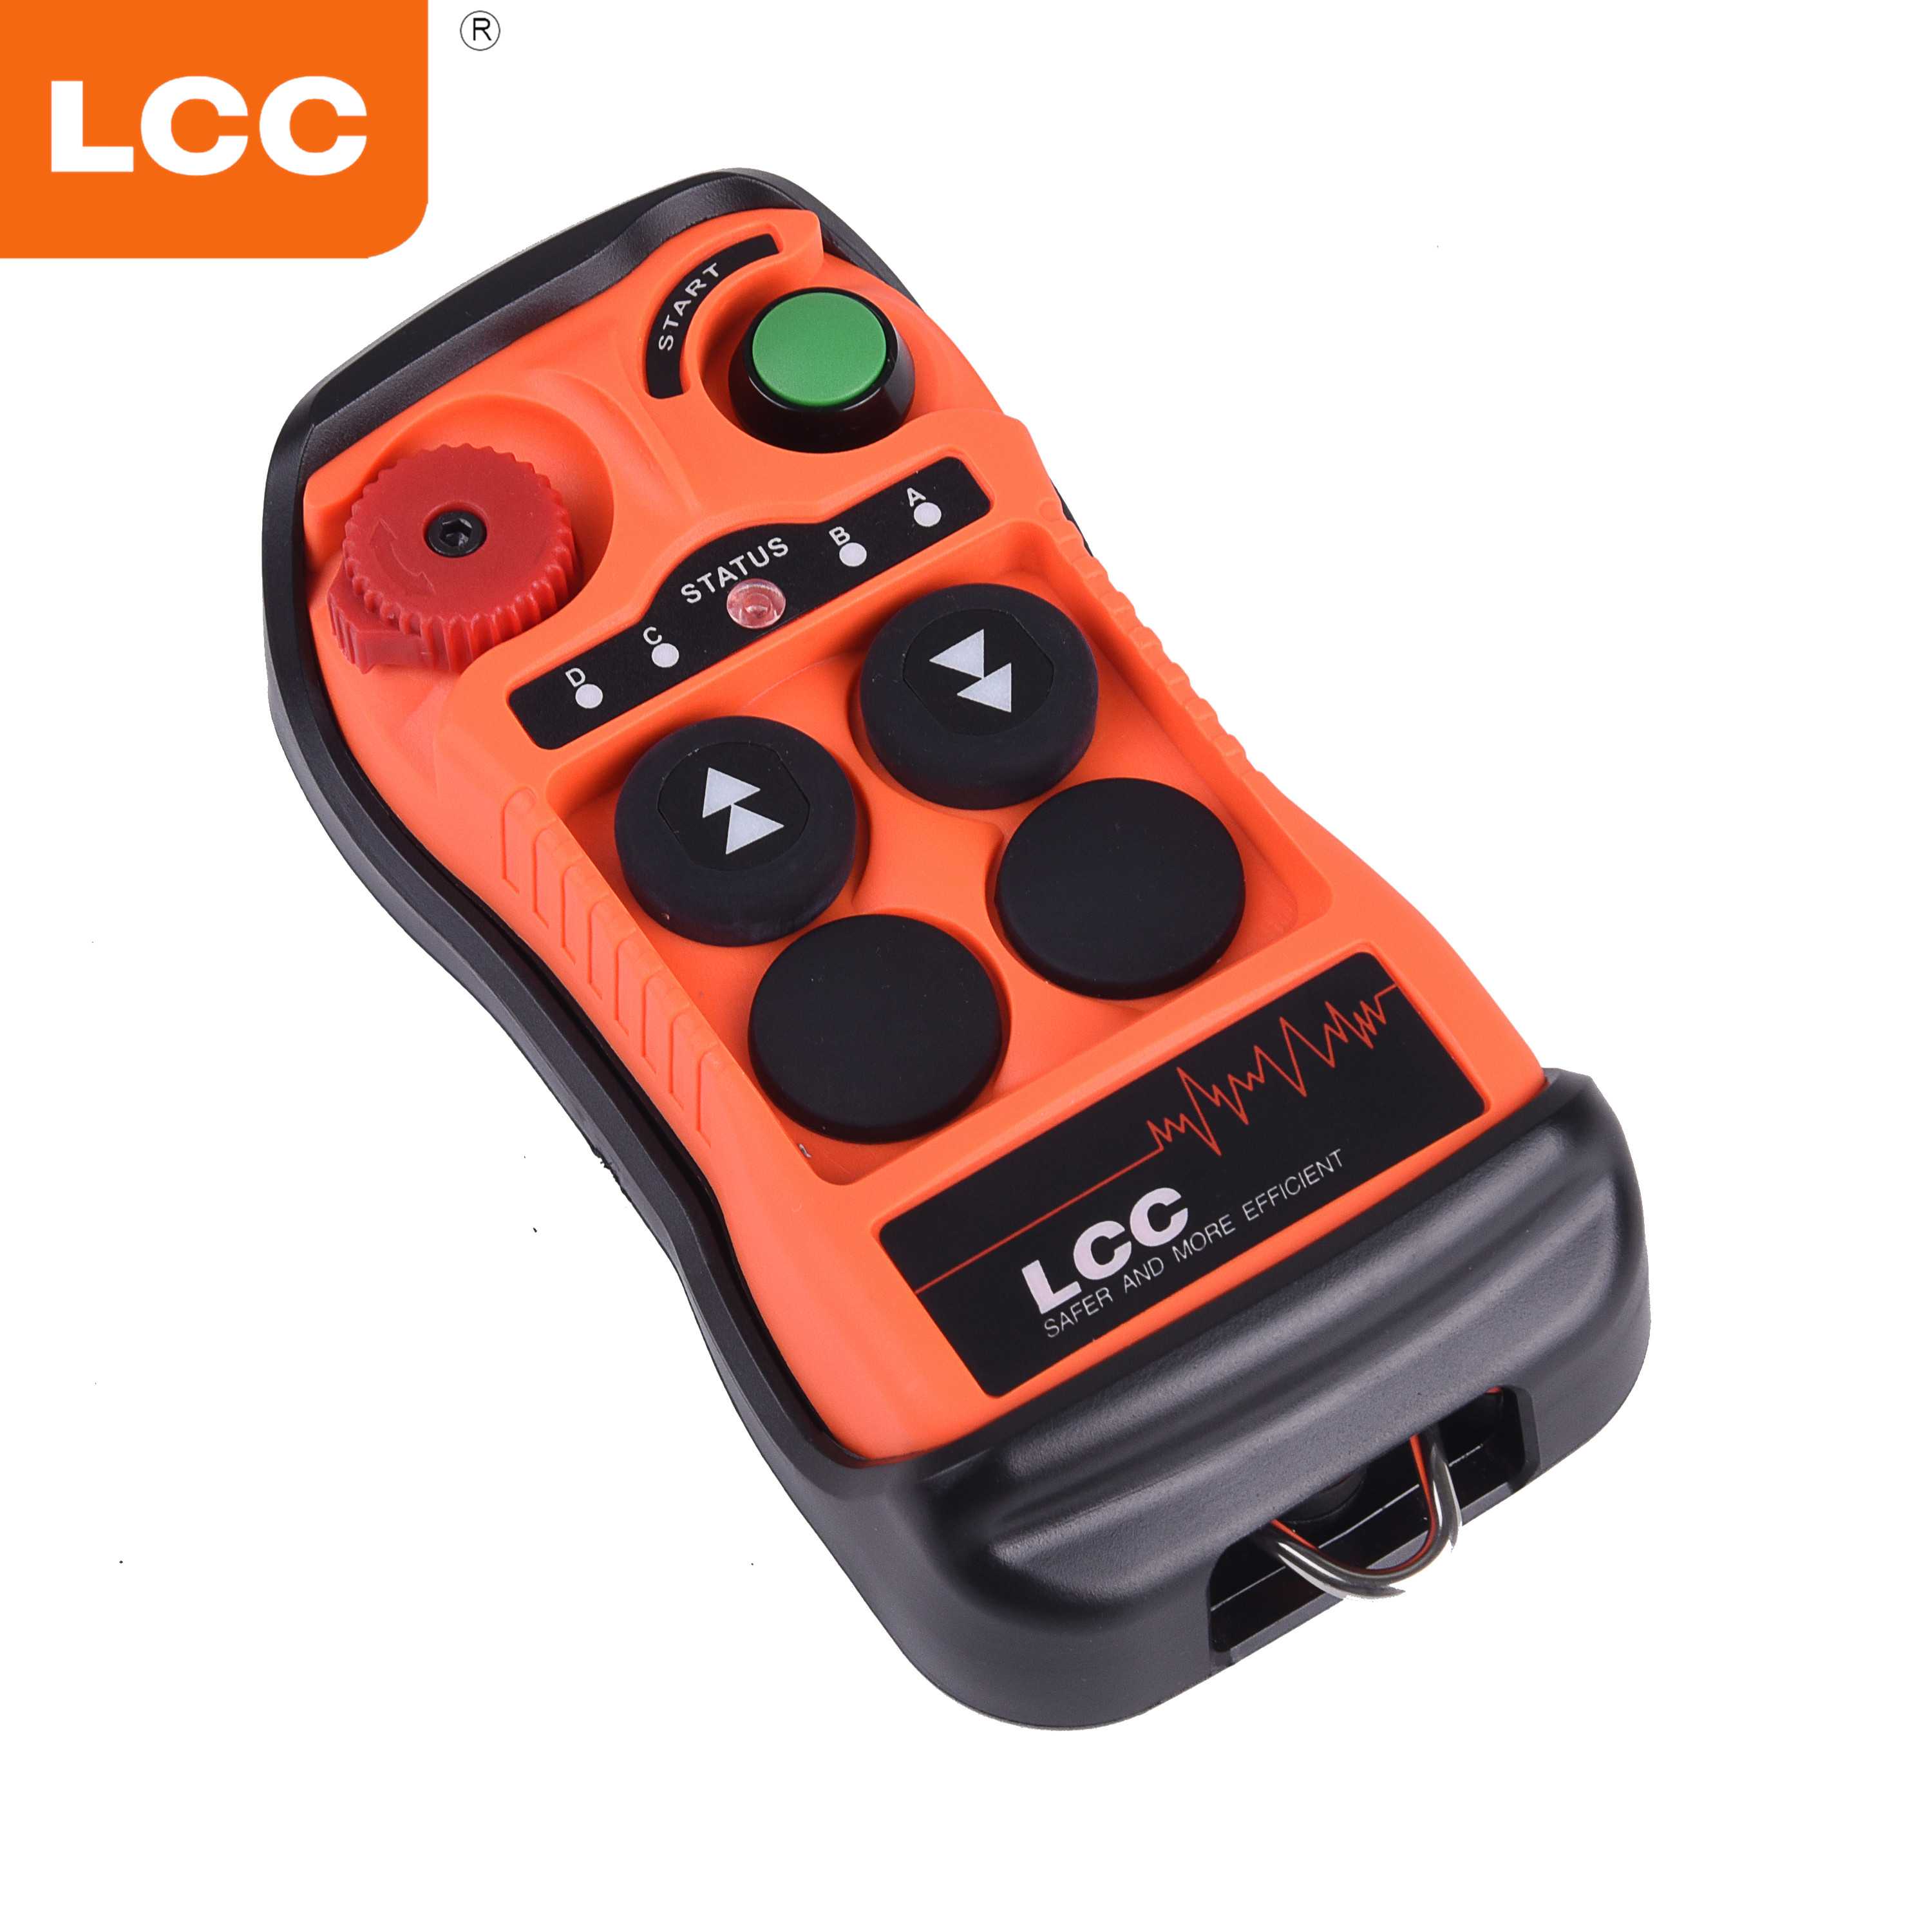 Q202 2 Buttons Industrial Winch ​Double Speed Remote Control for Trailer